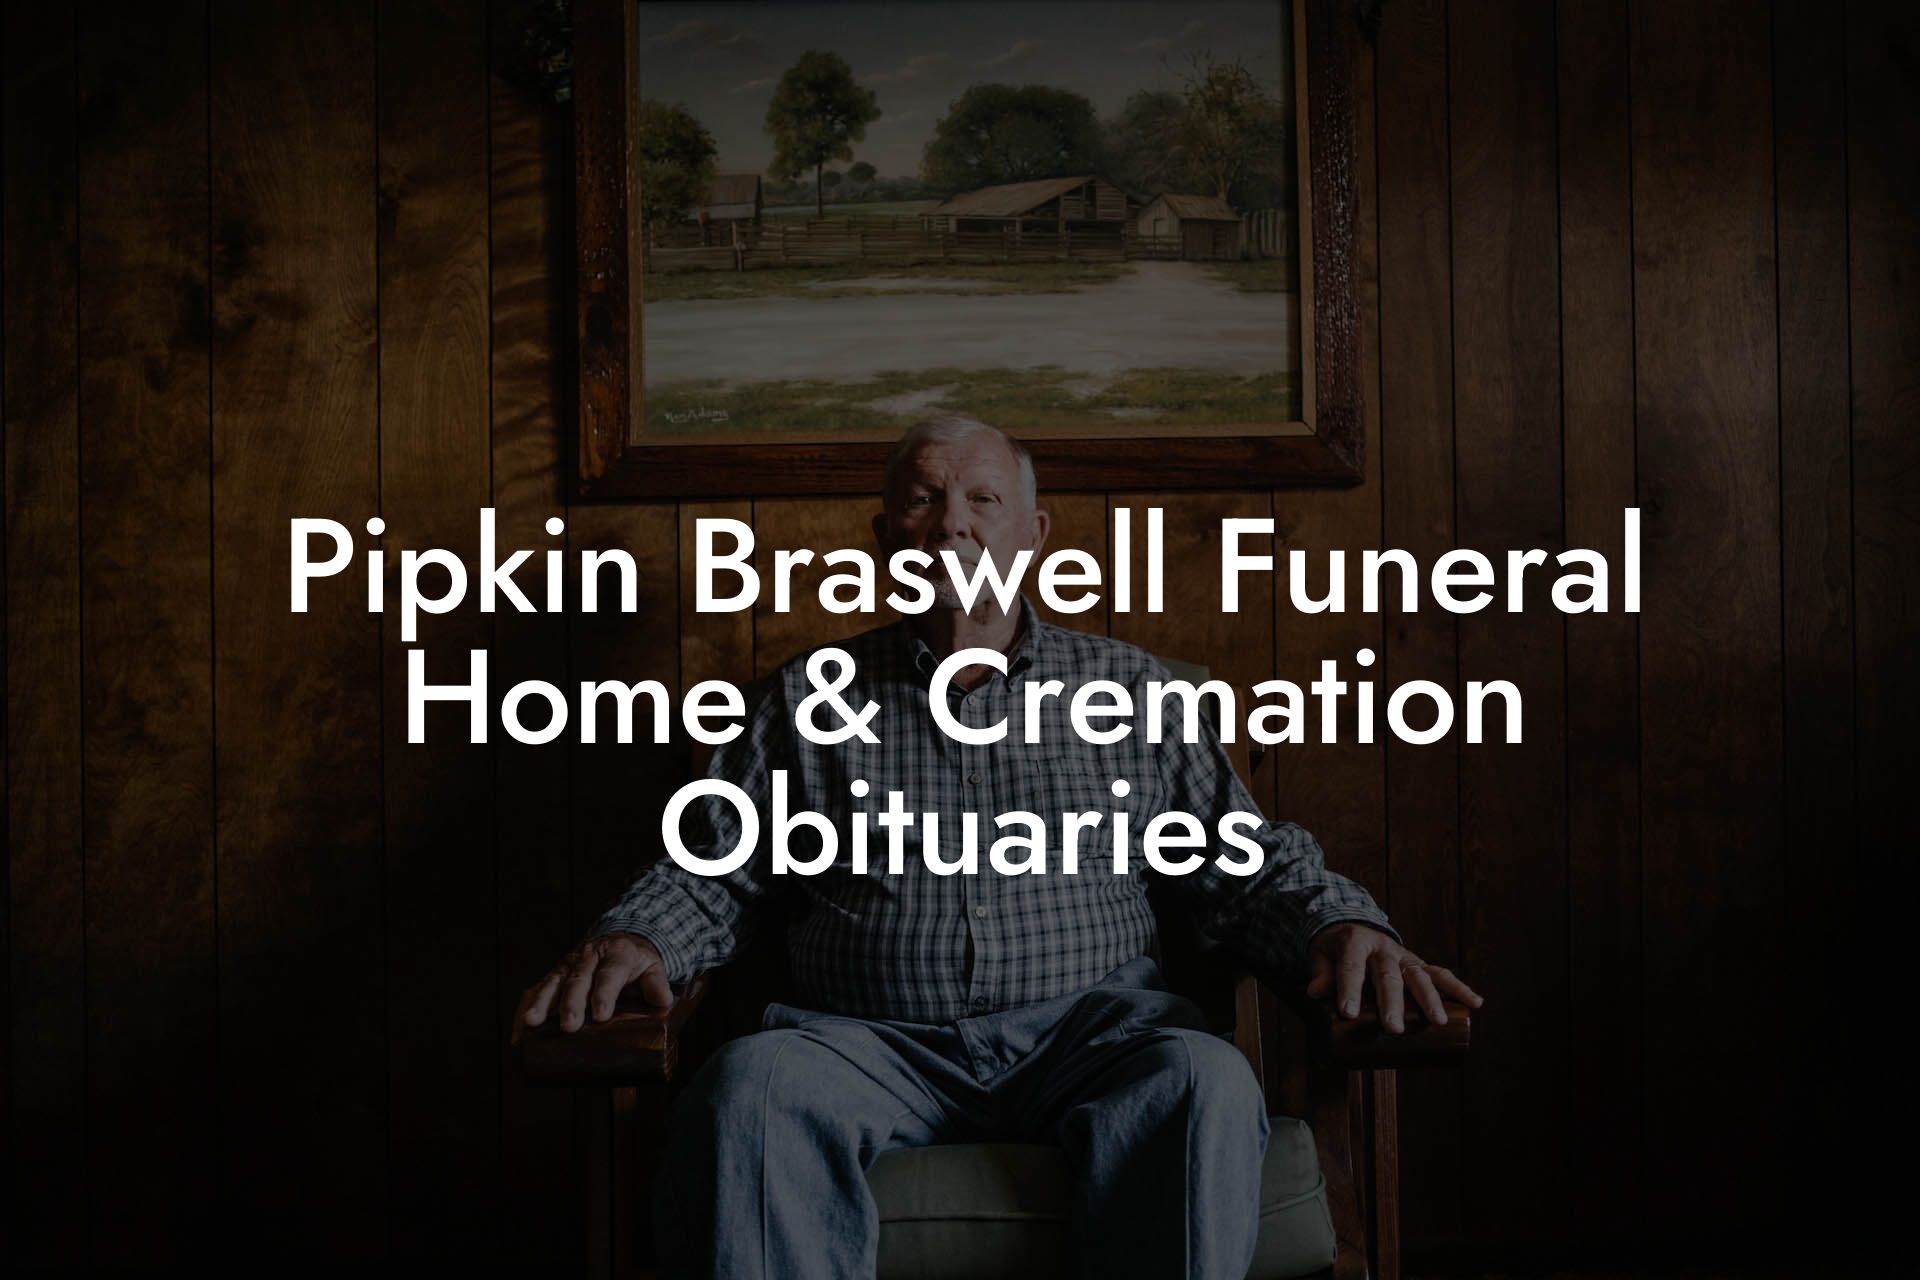 Pipkin Braswell Funeral Home & Cremation Obituaries